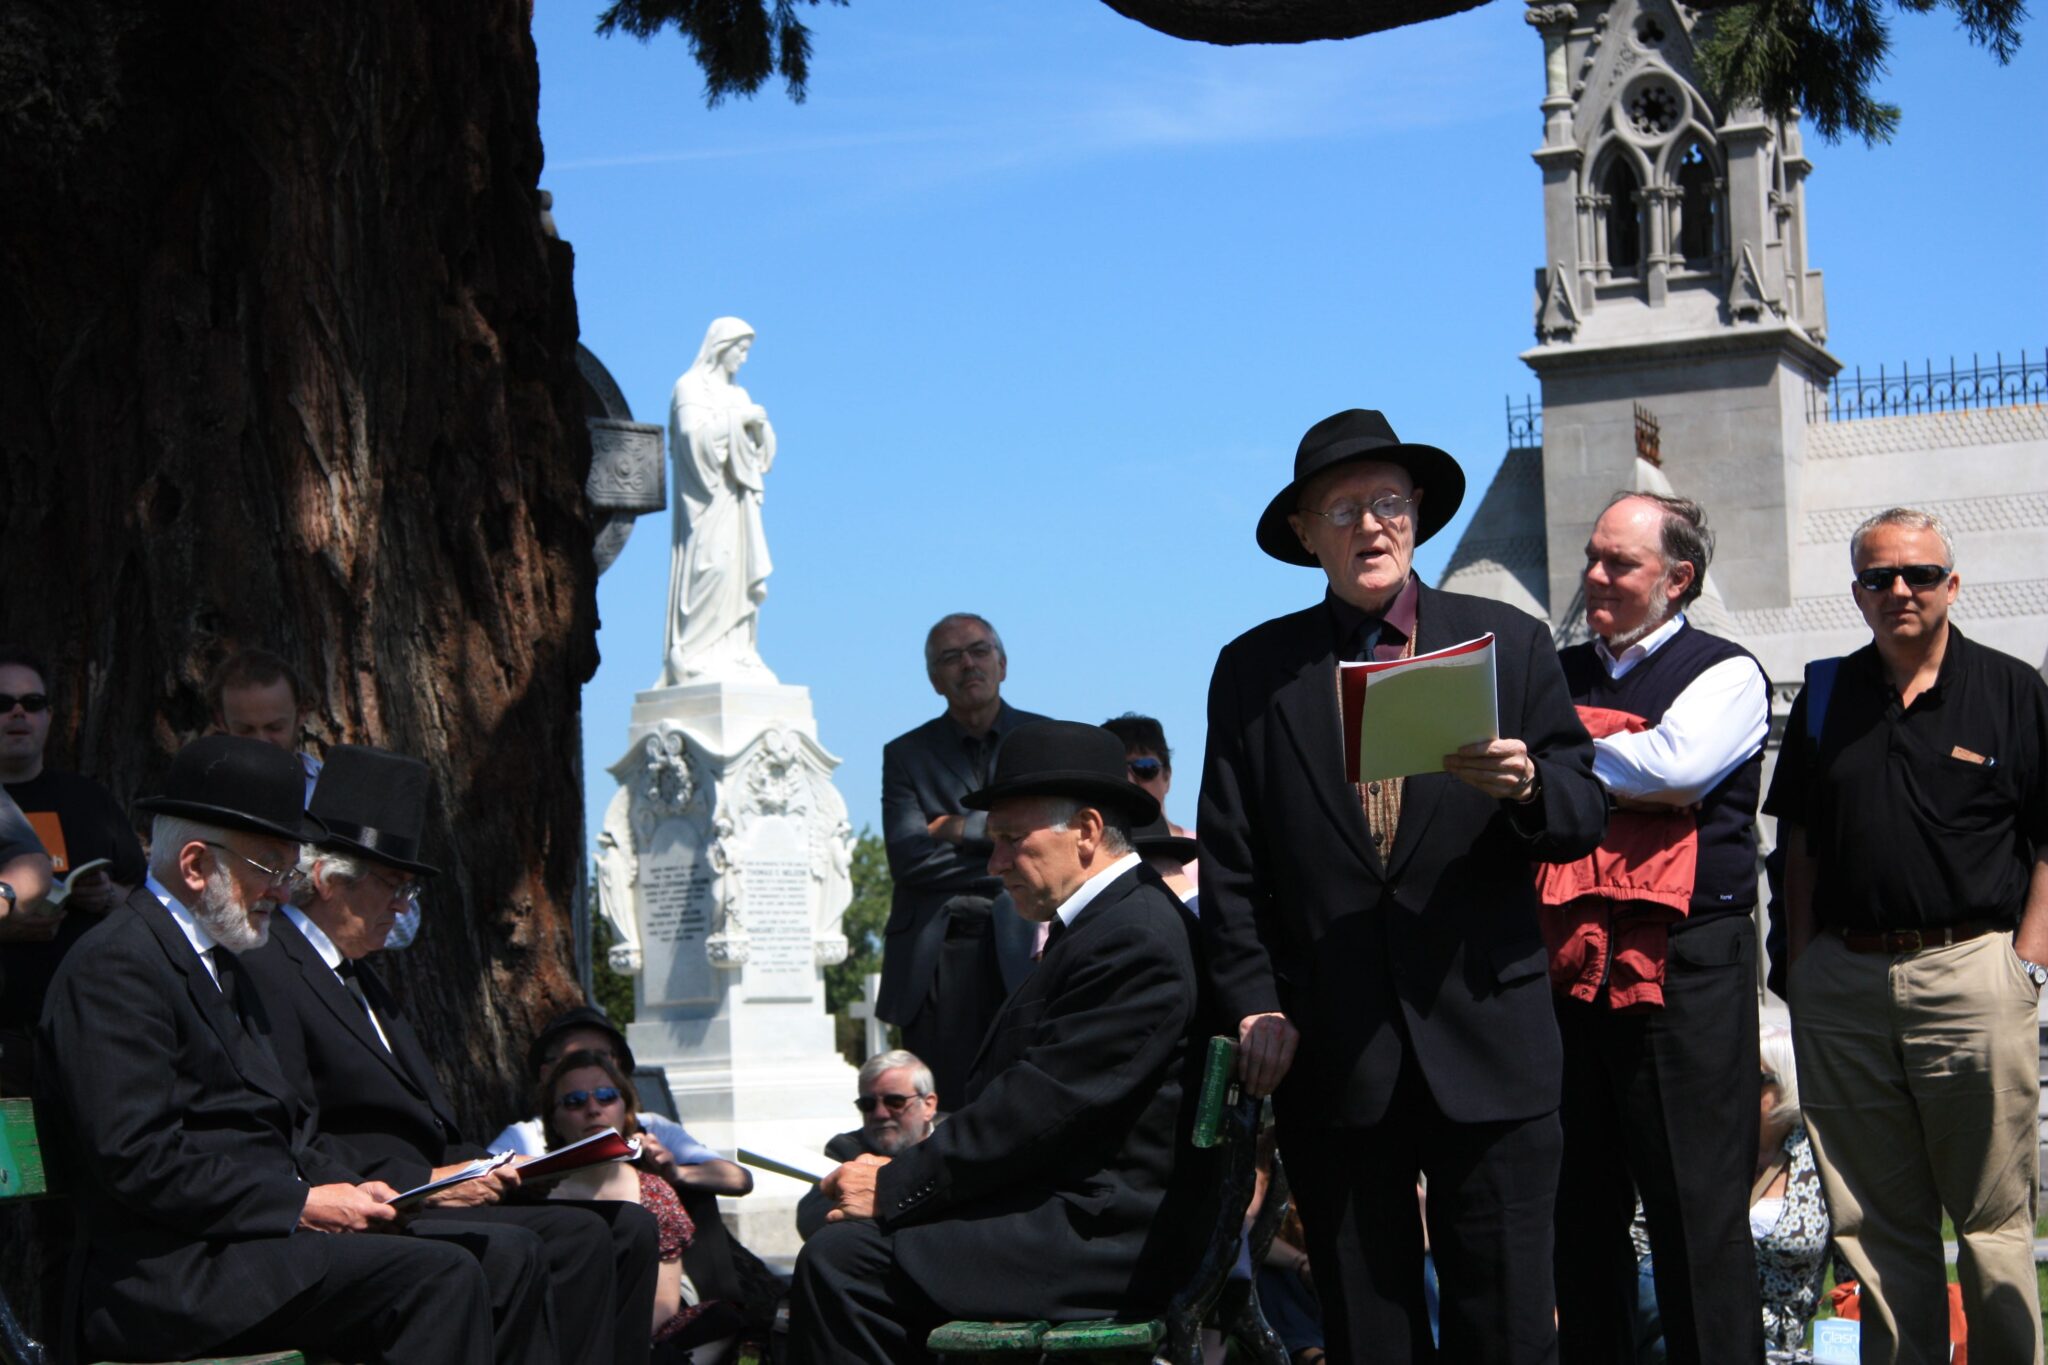 Bloomsday Celebrating James Joyce in Dublin • Irish Traditions A